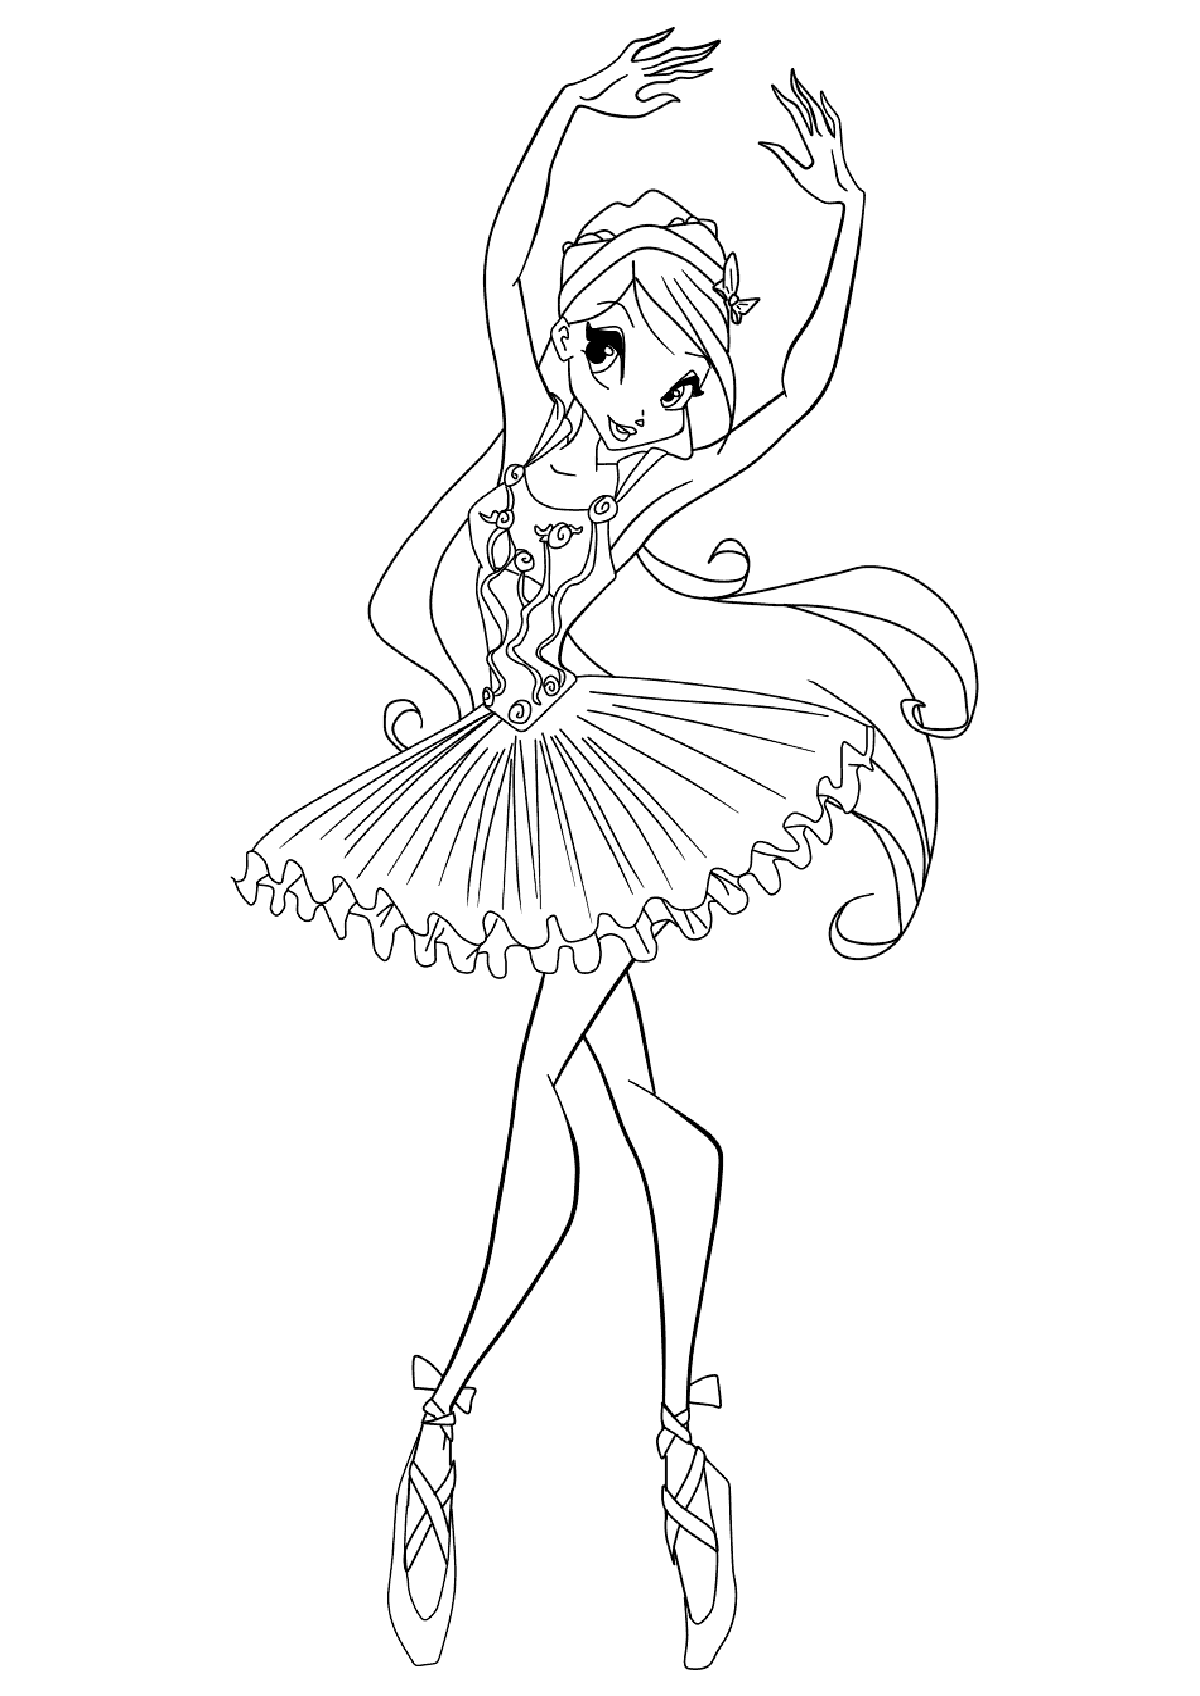 ballerina colouring pictures ballerina coloring pages for childrens printable for free ballerina pictures colouring 